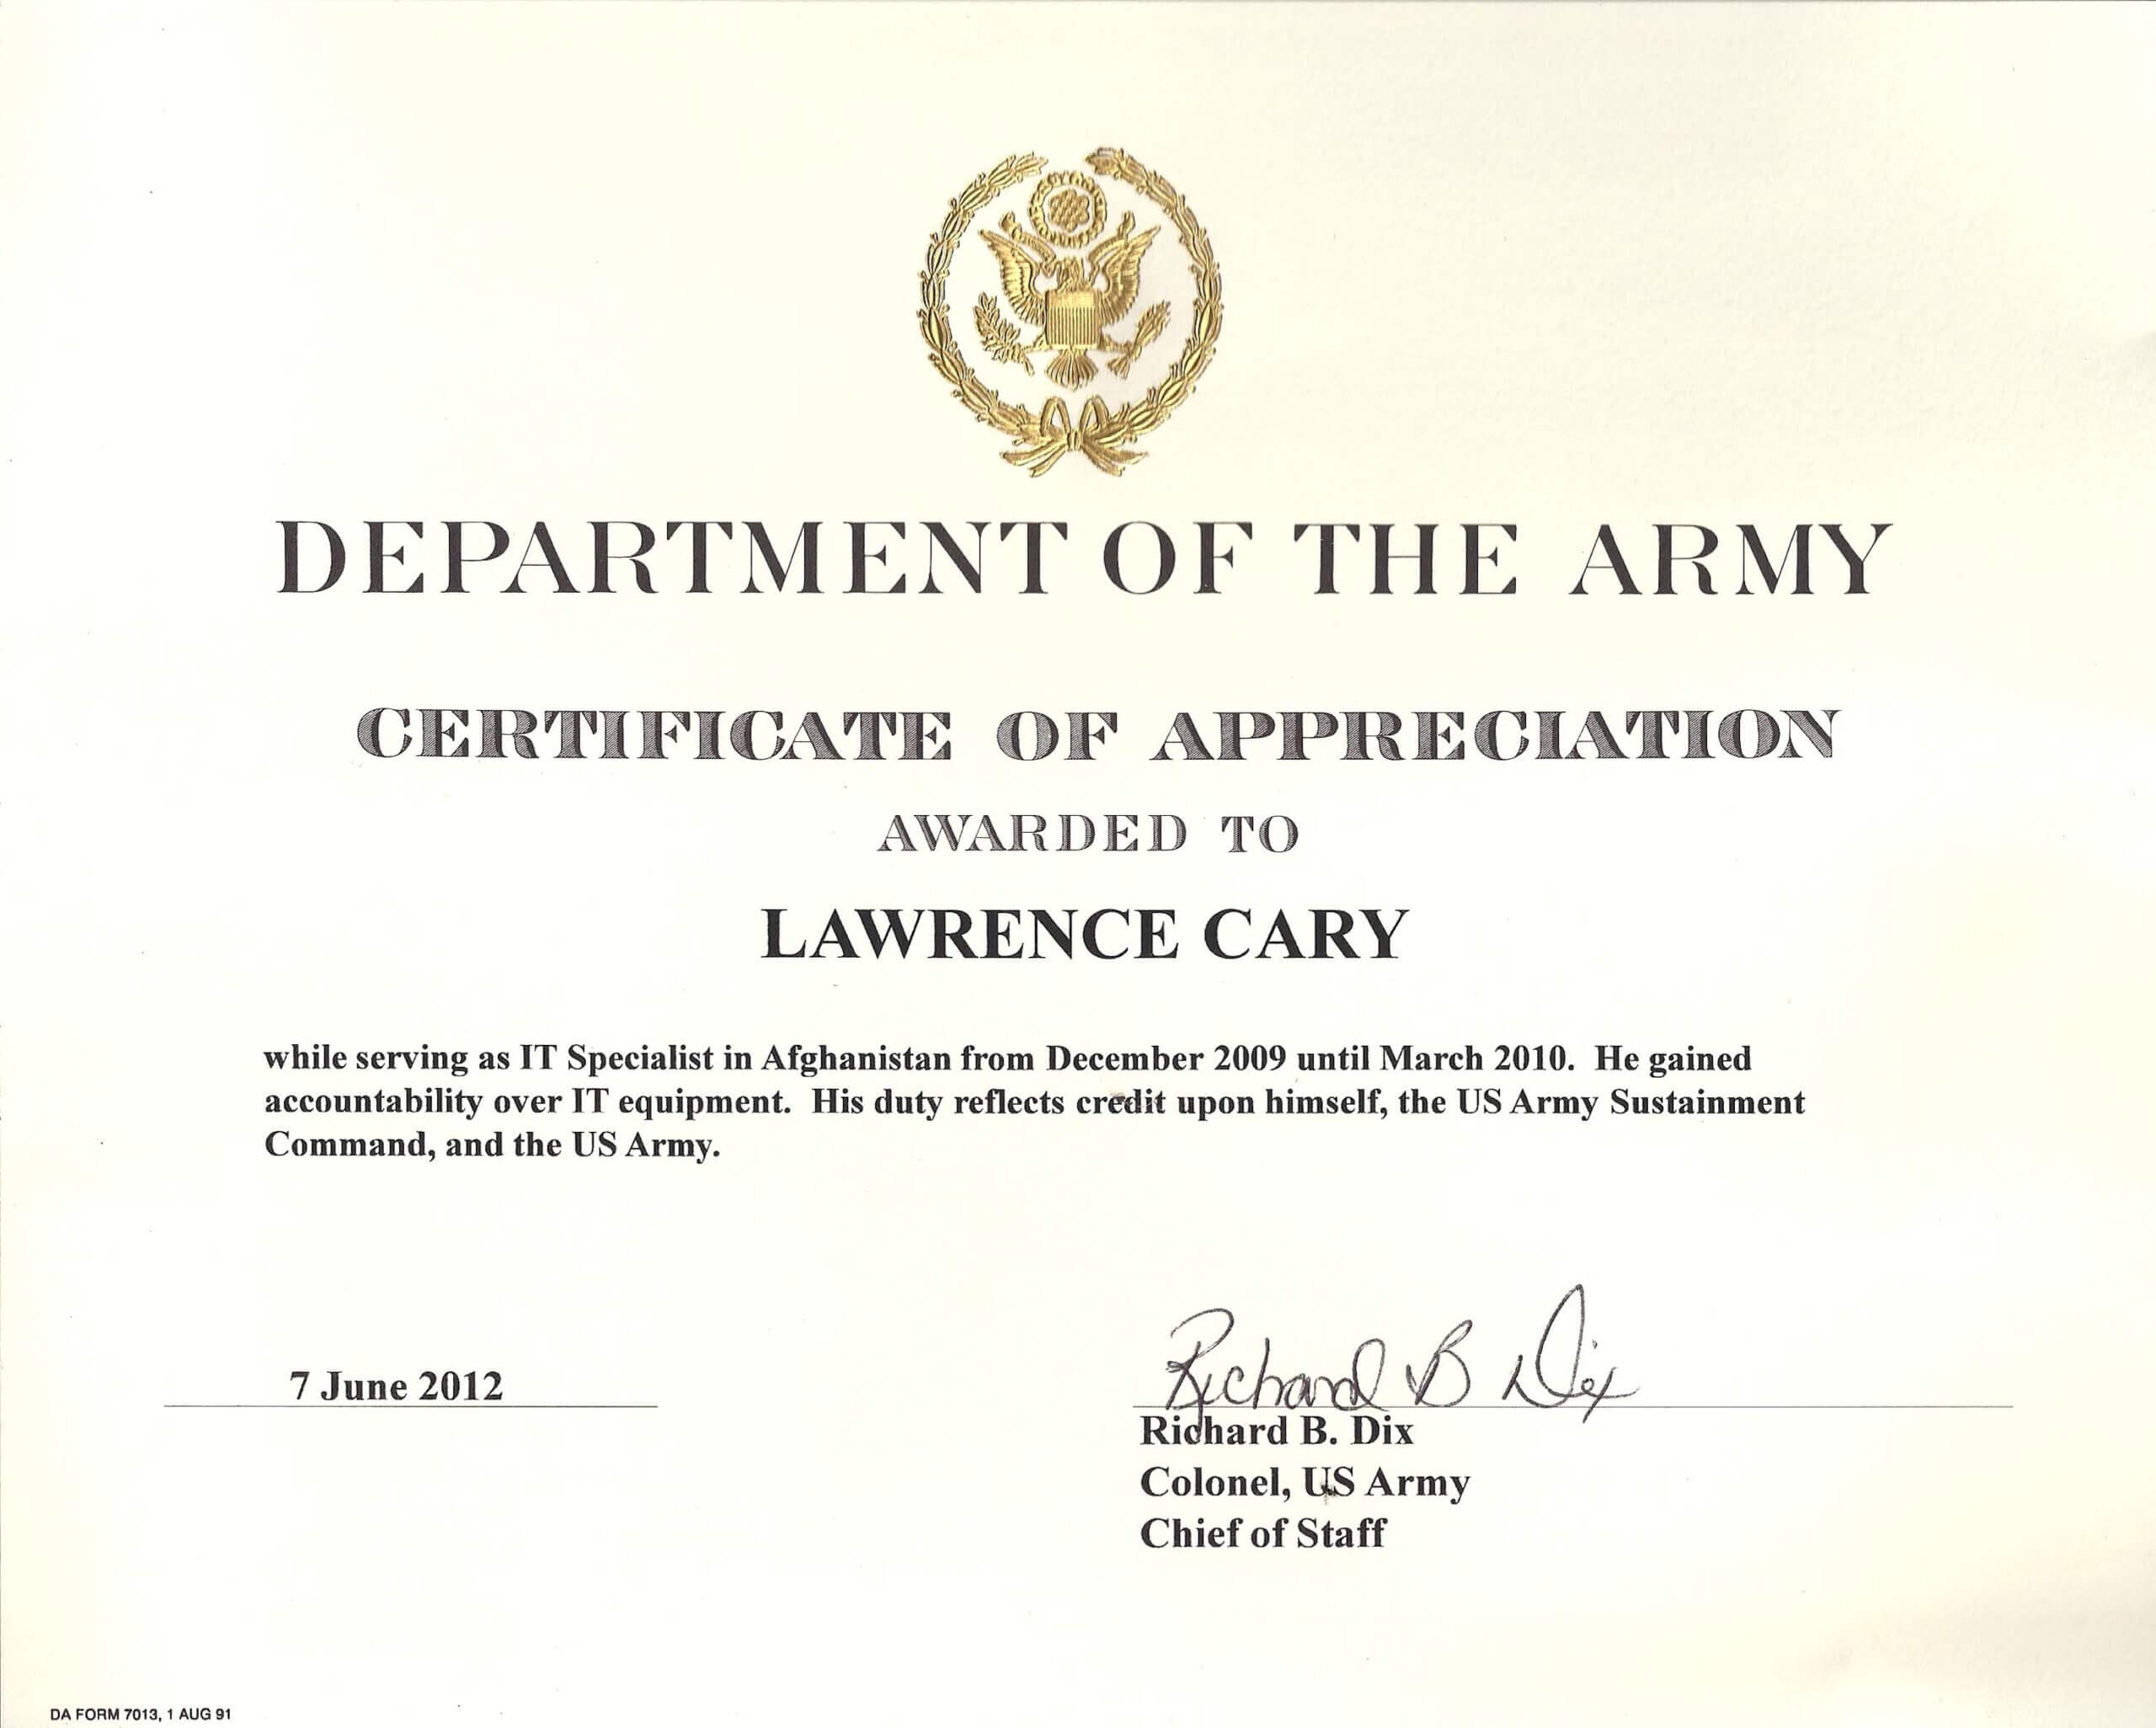 001 Army Certificate Of Appreciation Template Ideas Intended For Certificate Of Achievement Army Template